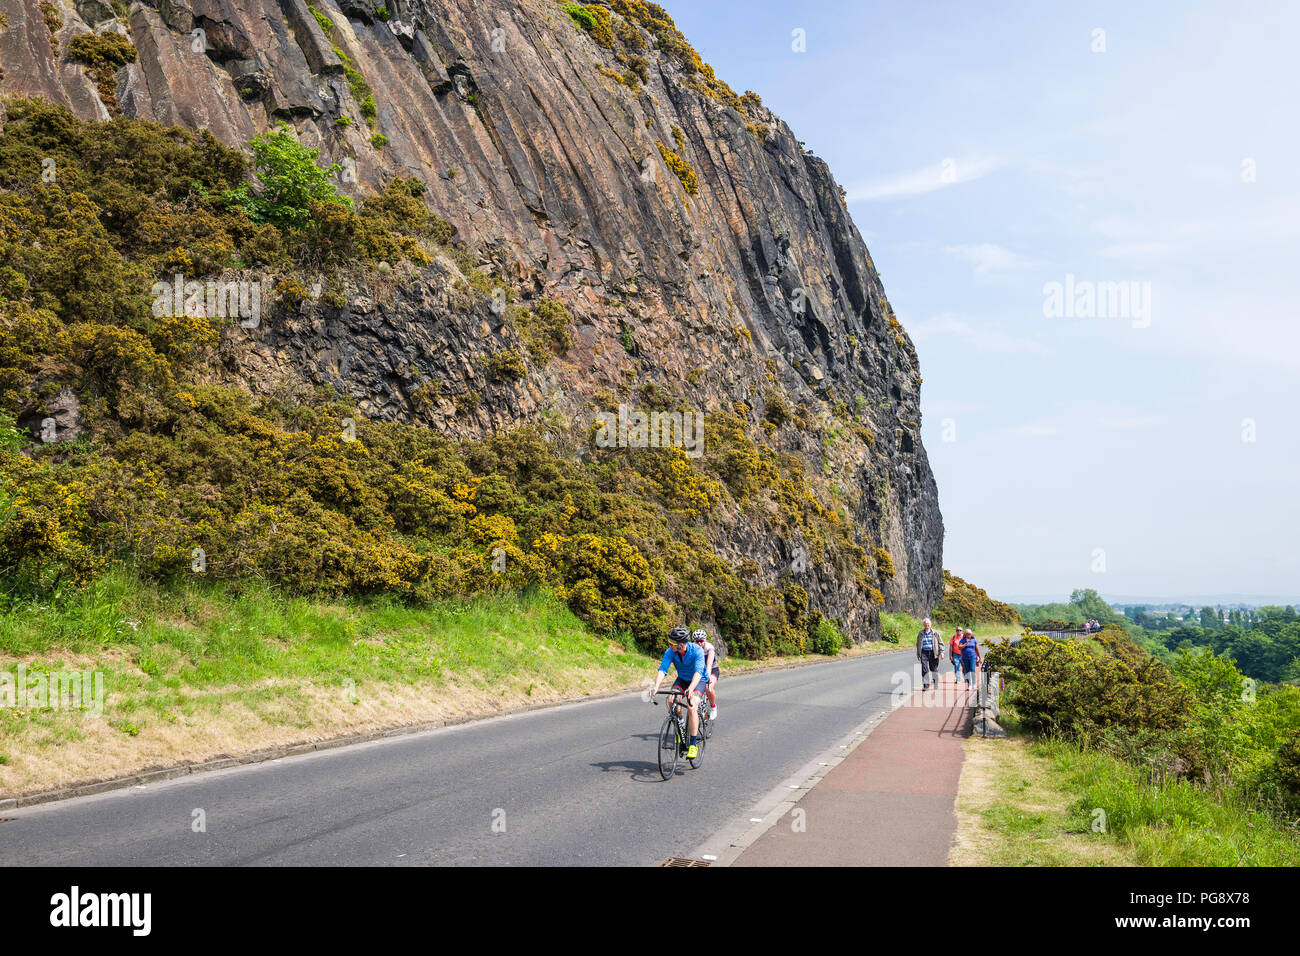 Cyclists and walkers on Duddingston Low Road beneath the cliffs of Arthur's Seat.  The road links Duddingston Village with central Edinburgh. Stock Photo